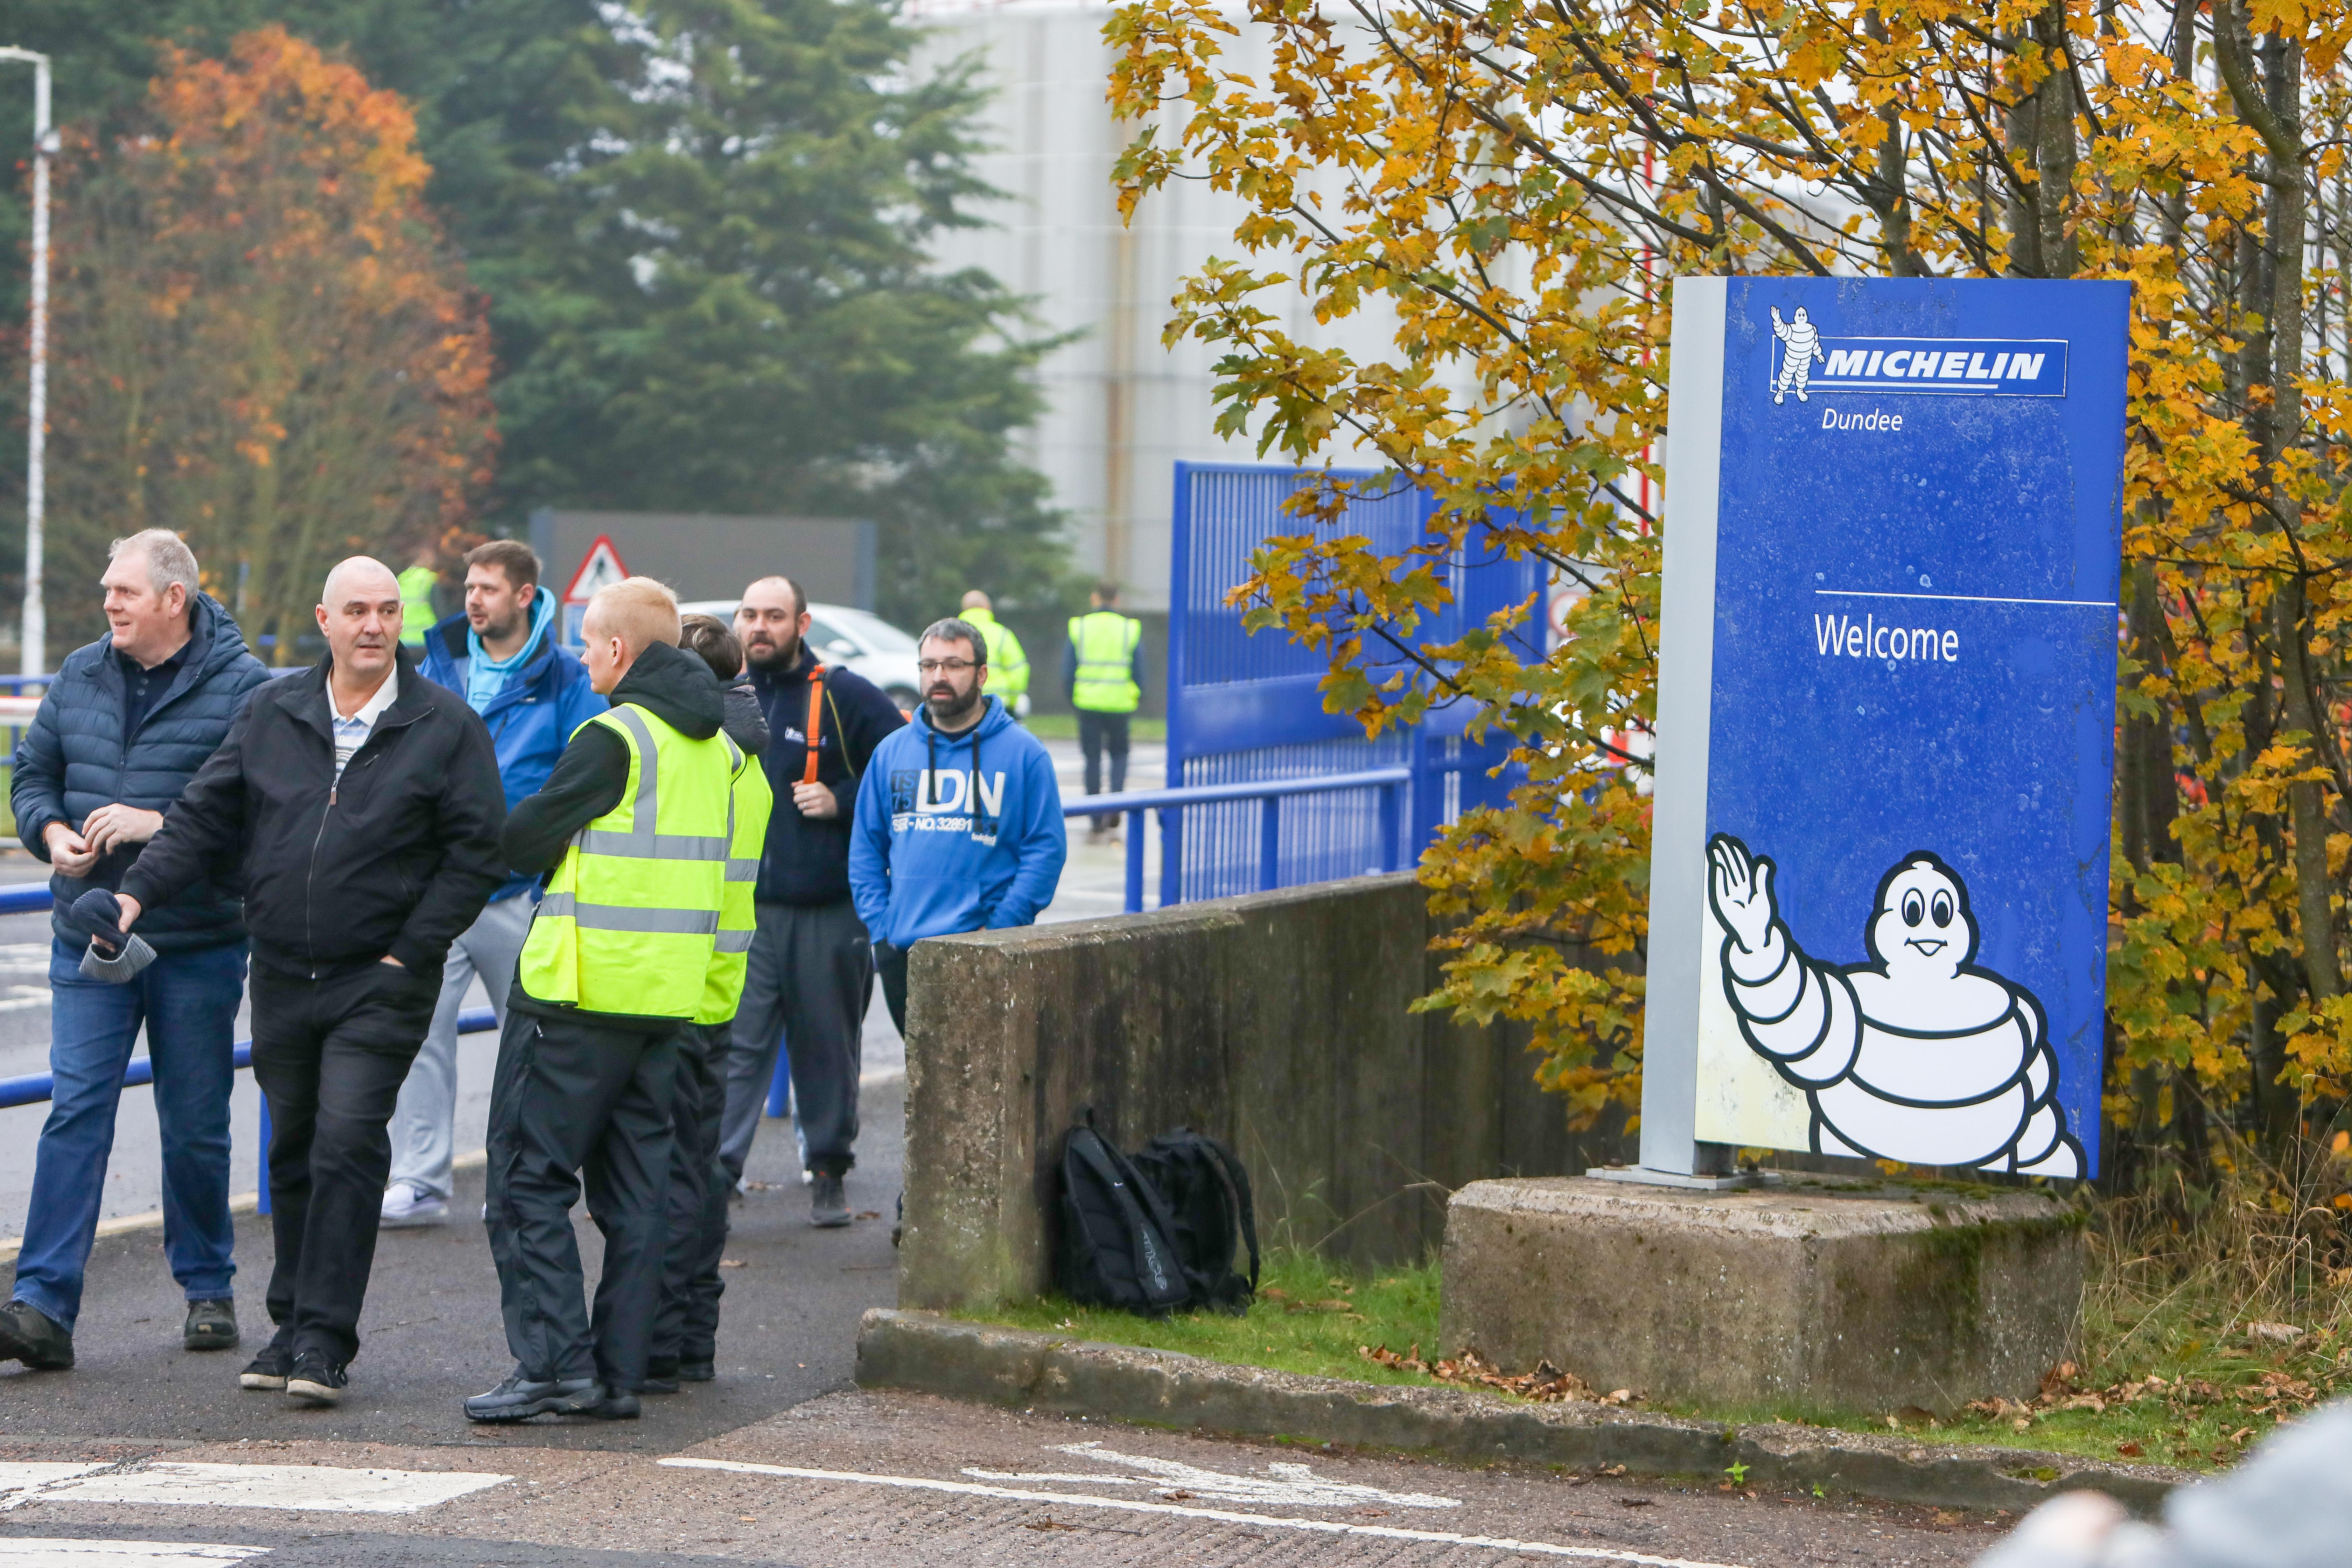 Staff leave Michelin Dundee after the closure announcement earlier this month.